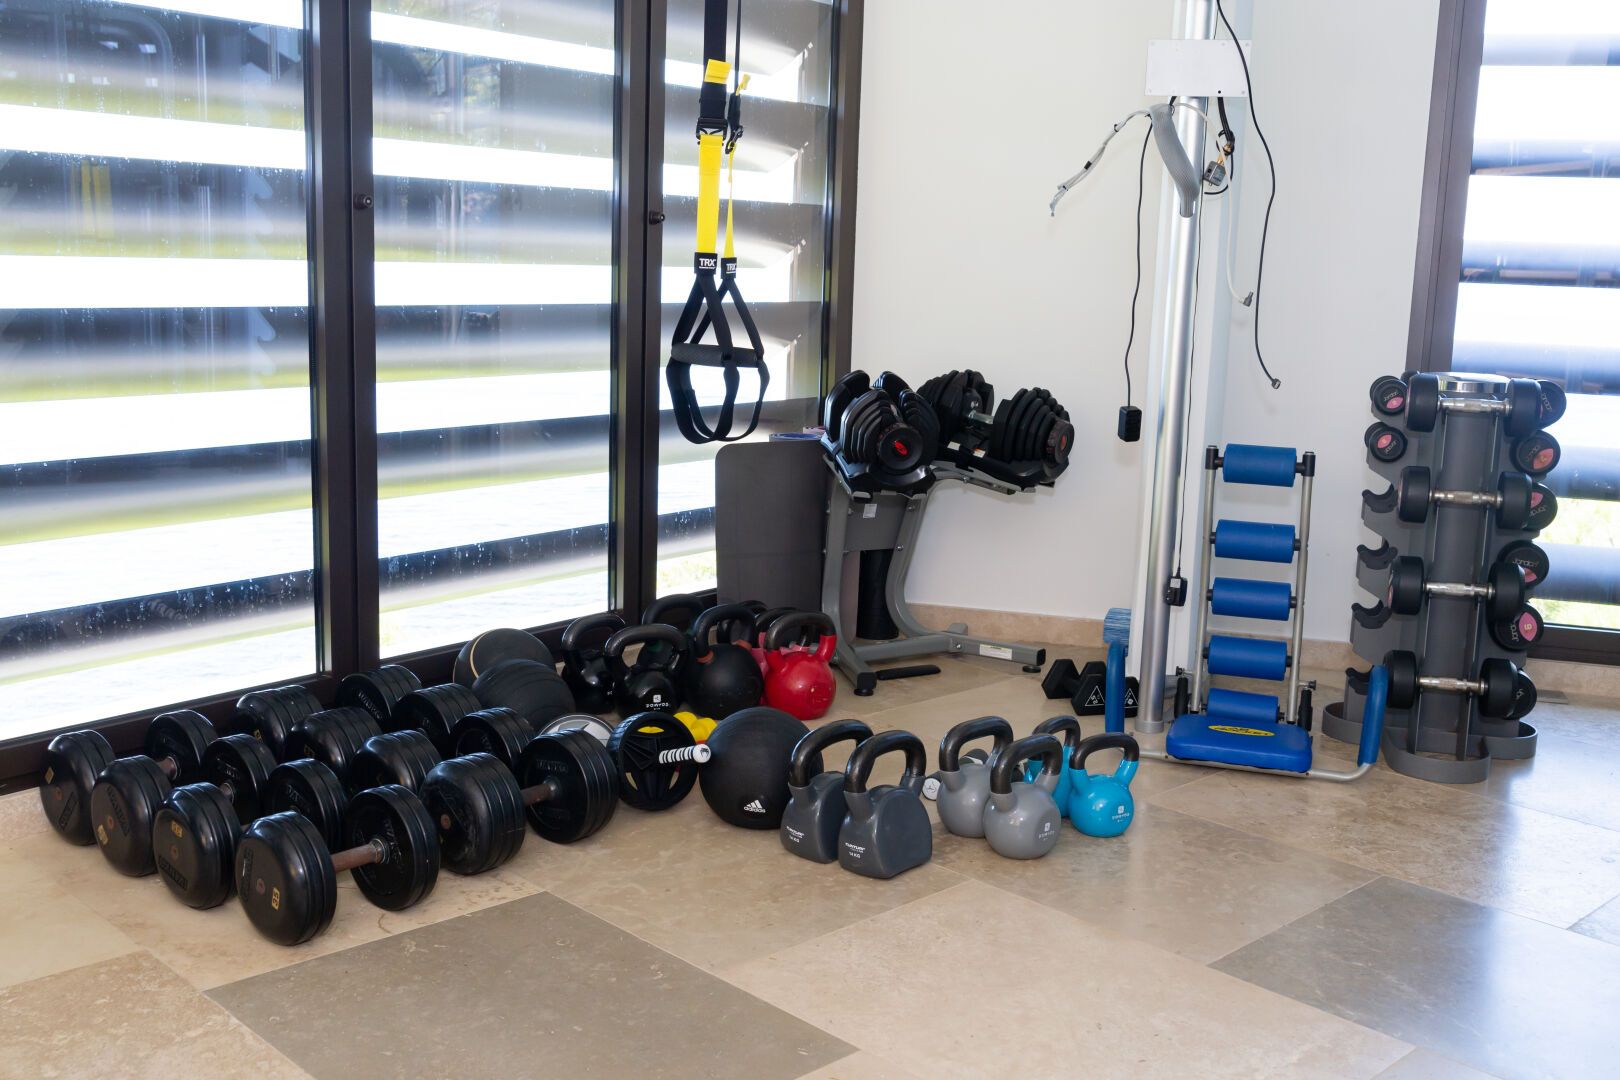 Null Set of dumbbells on a stand and a set of kettle bells.